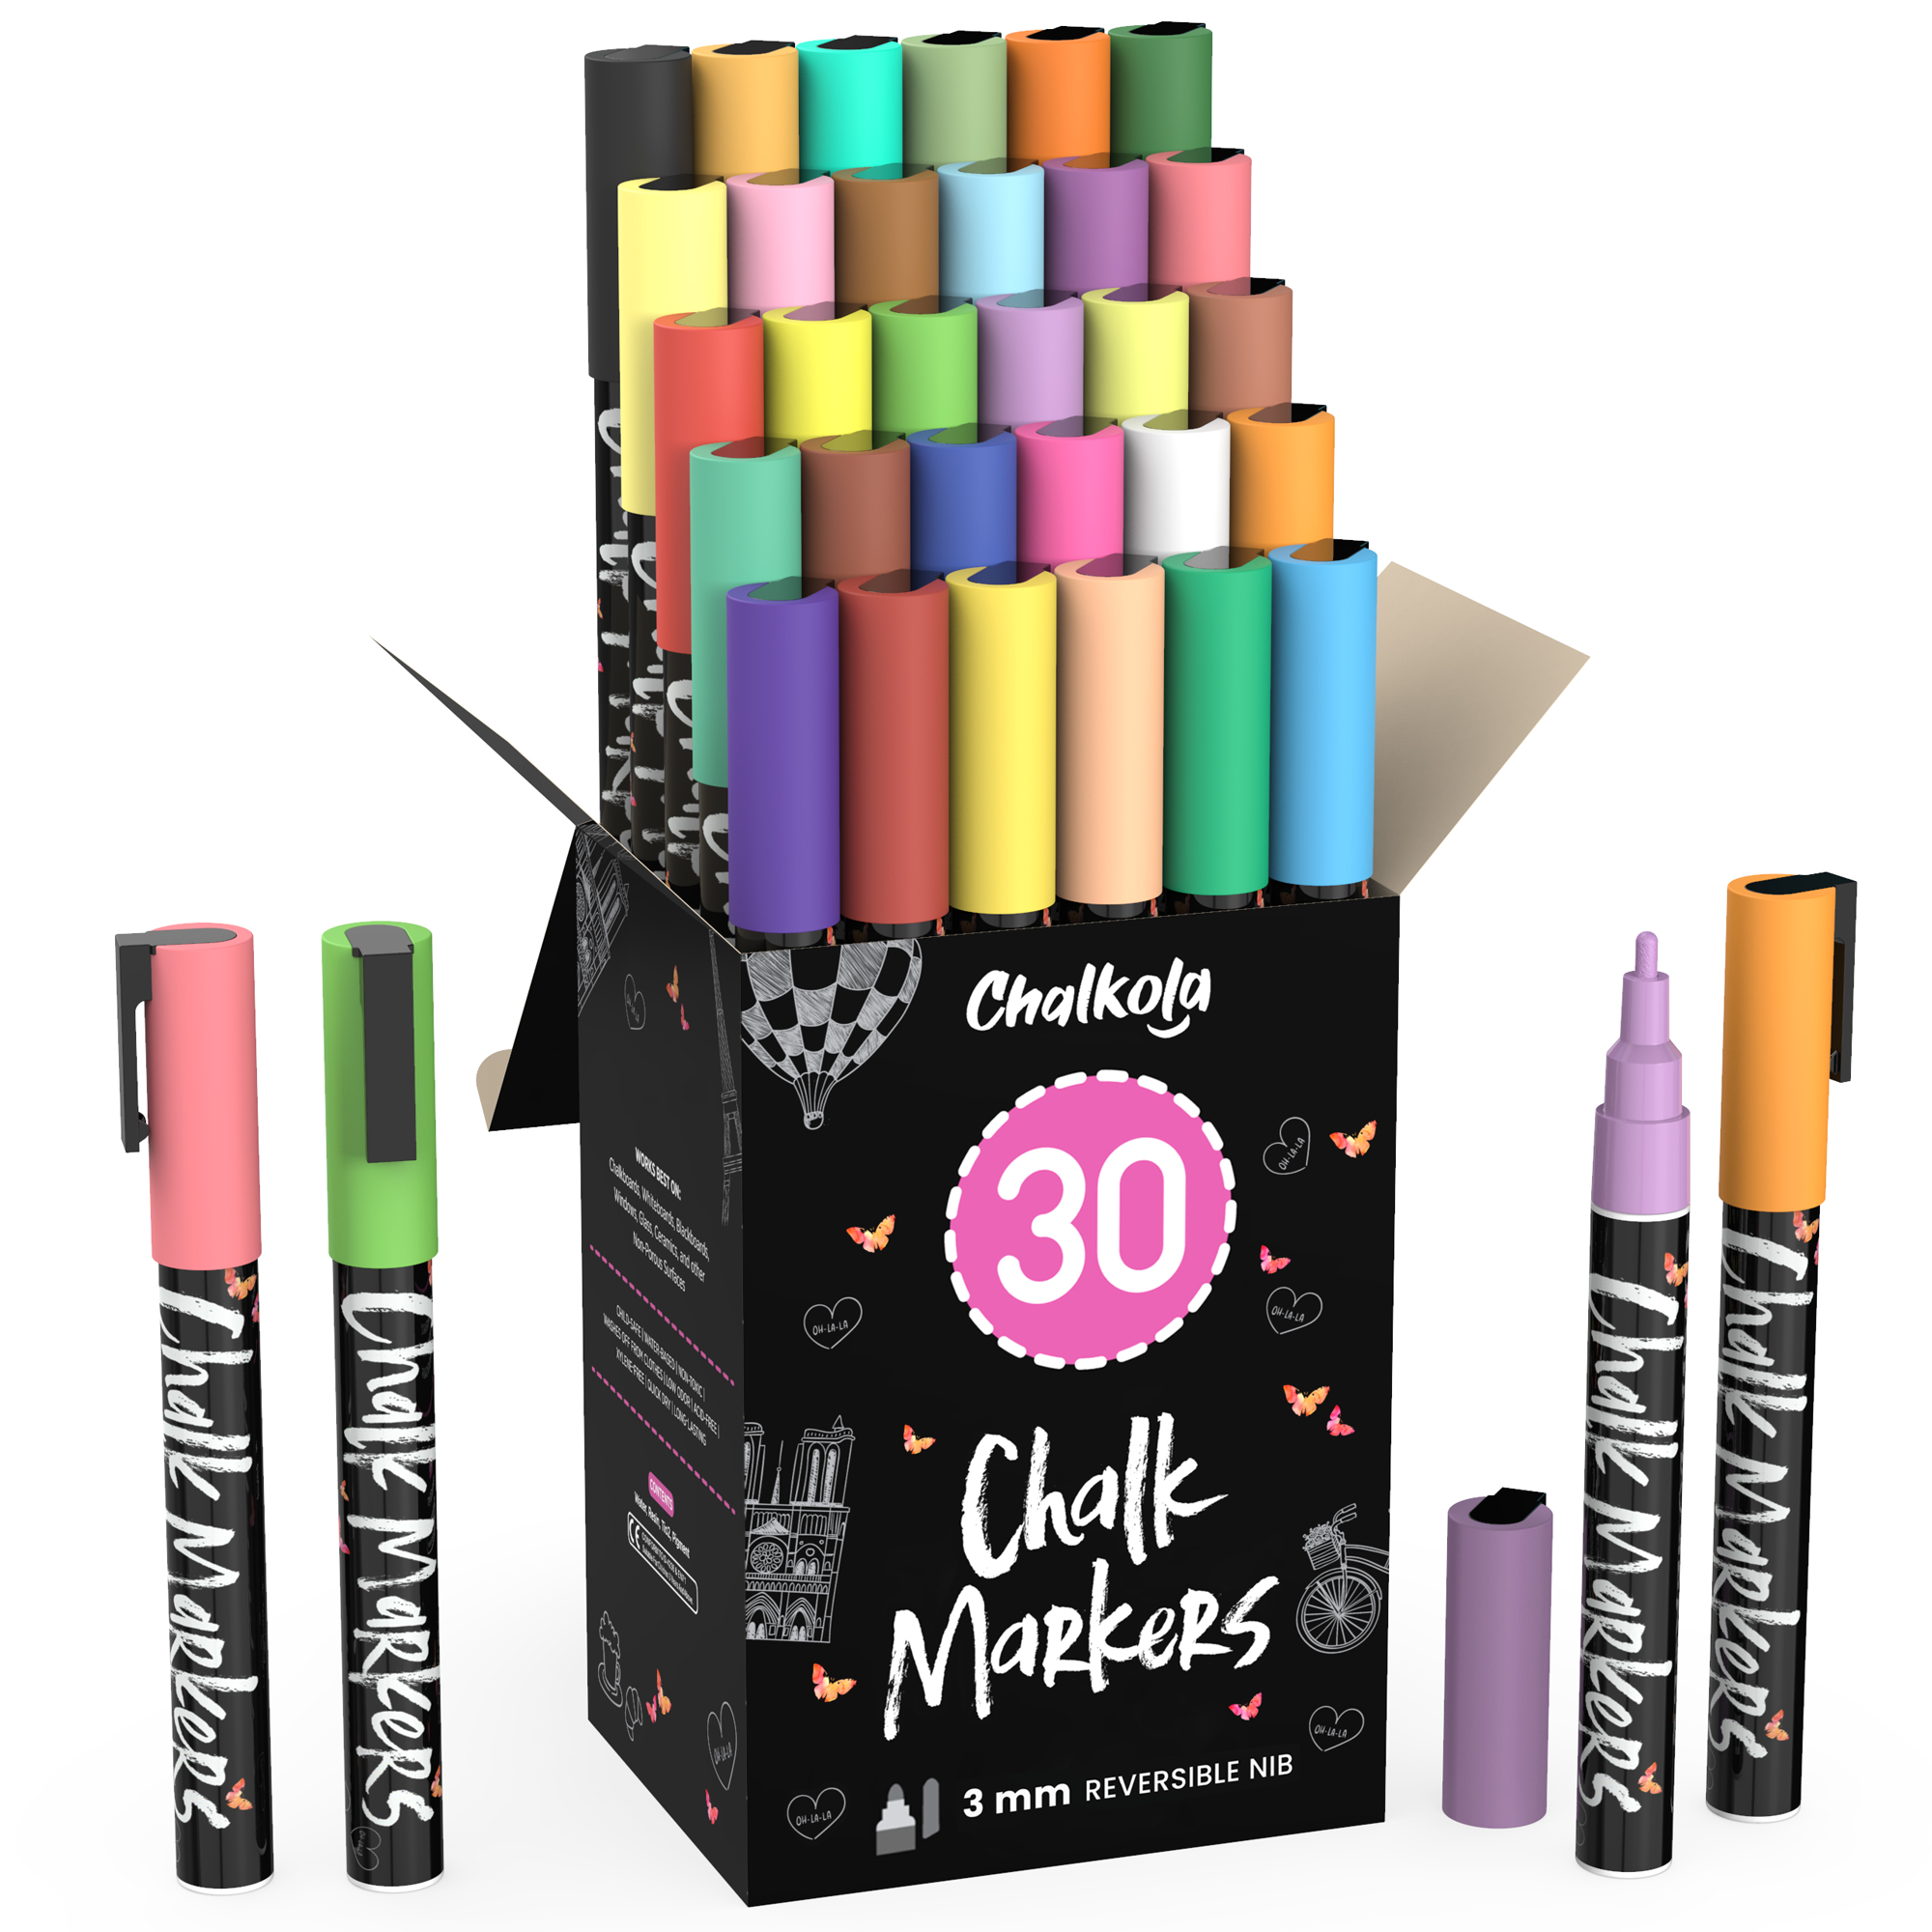 Neon, Pastel and Metallic Colors Chalk Markers - Pack of 40 - Chalkola Art  Supply